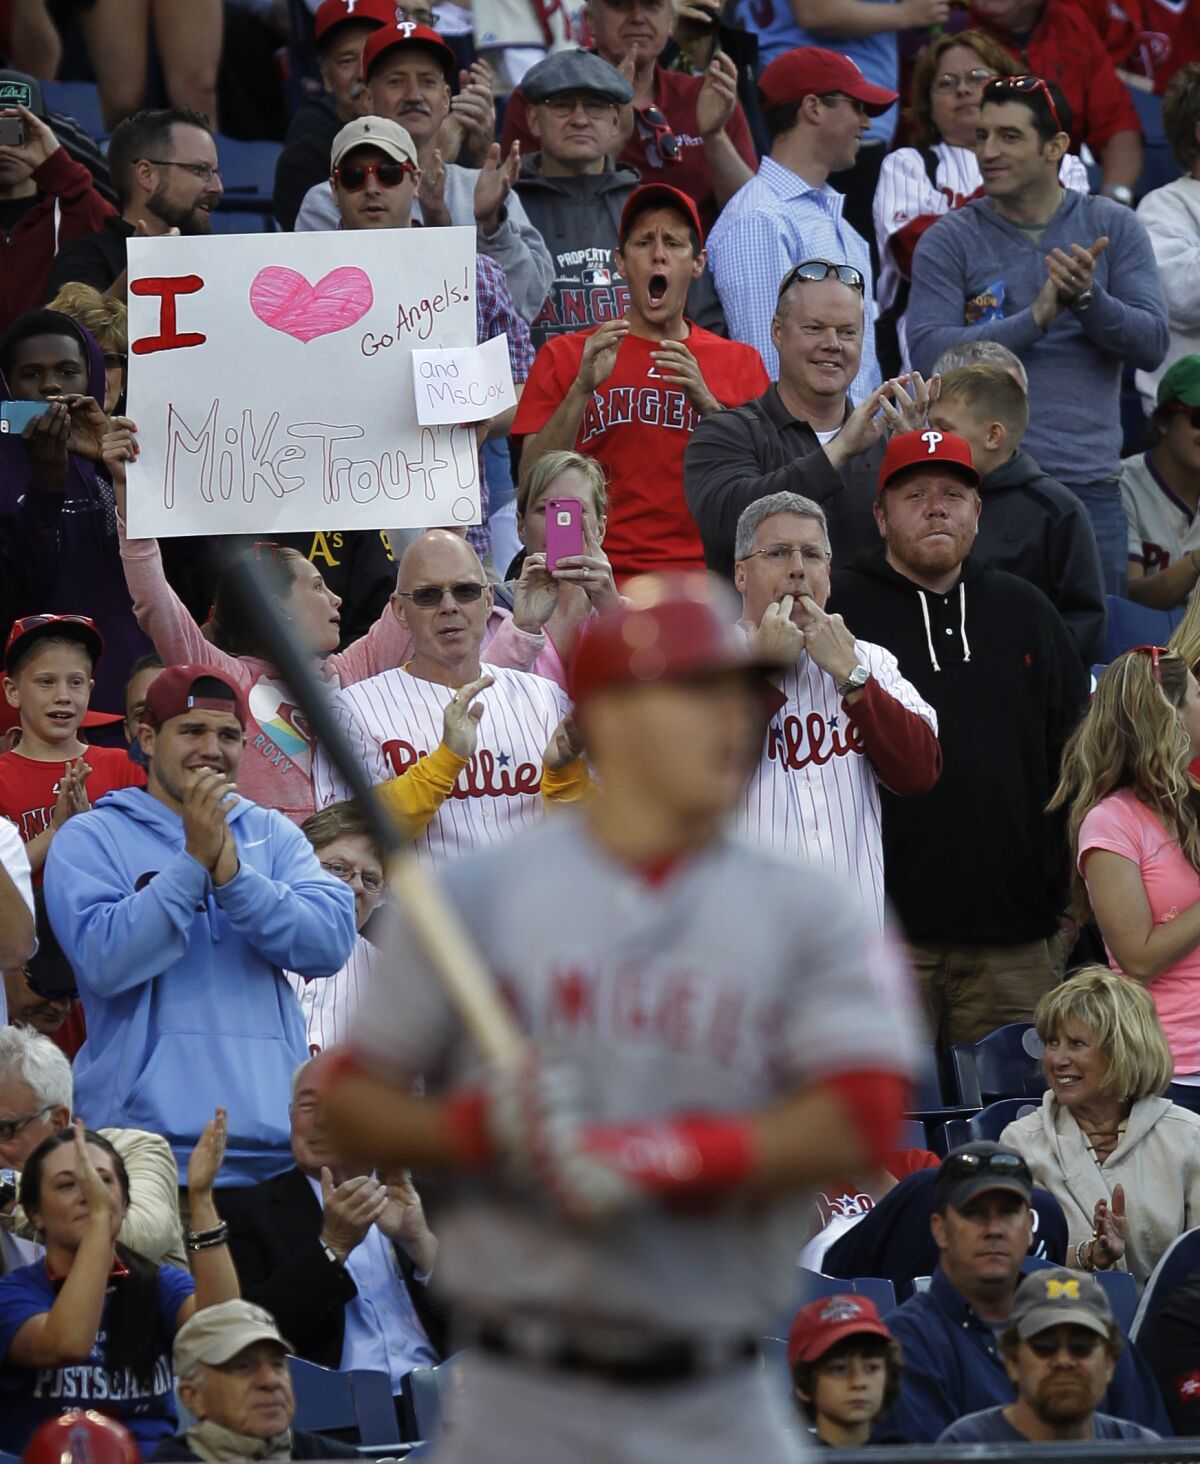 Fans cheer as Angels' Mike Trout approaches the plate for his first at-bat.